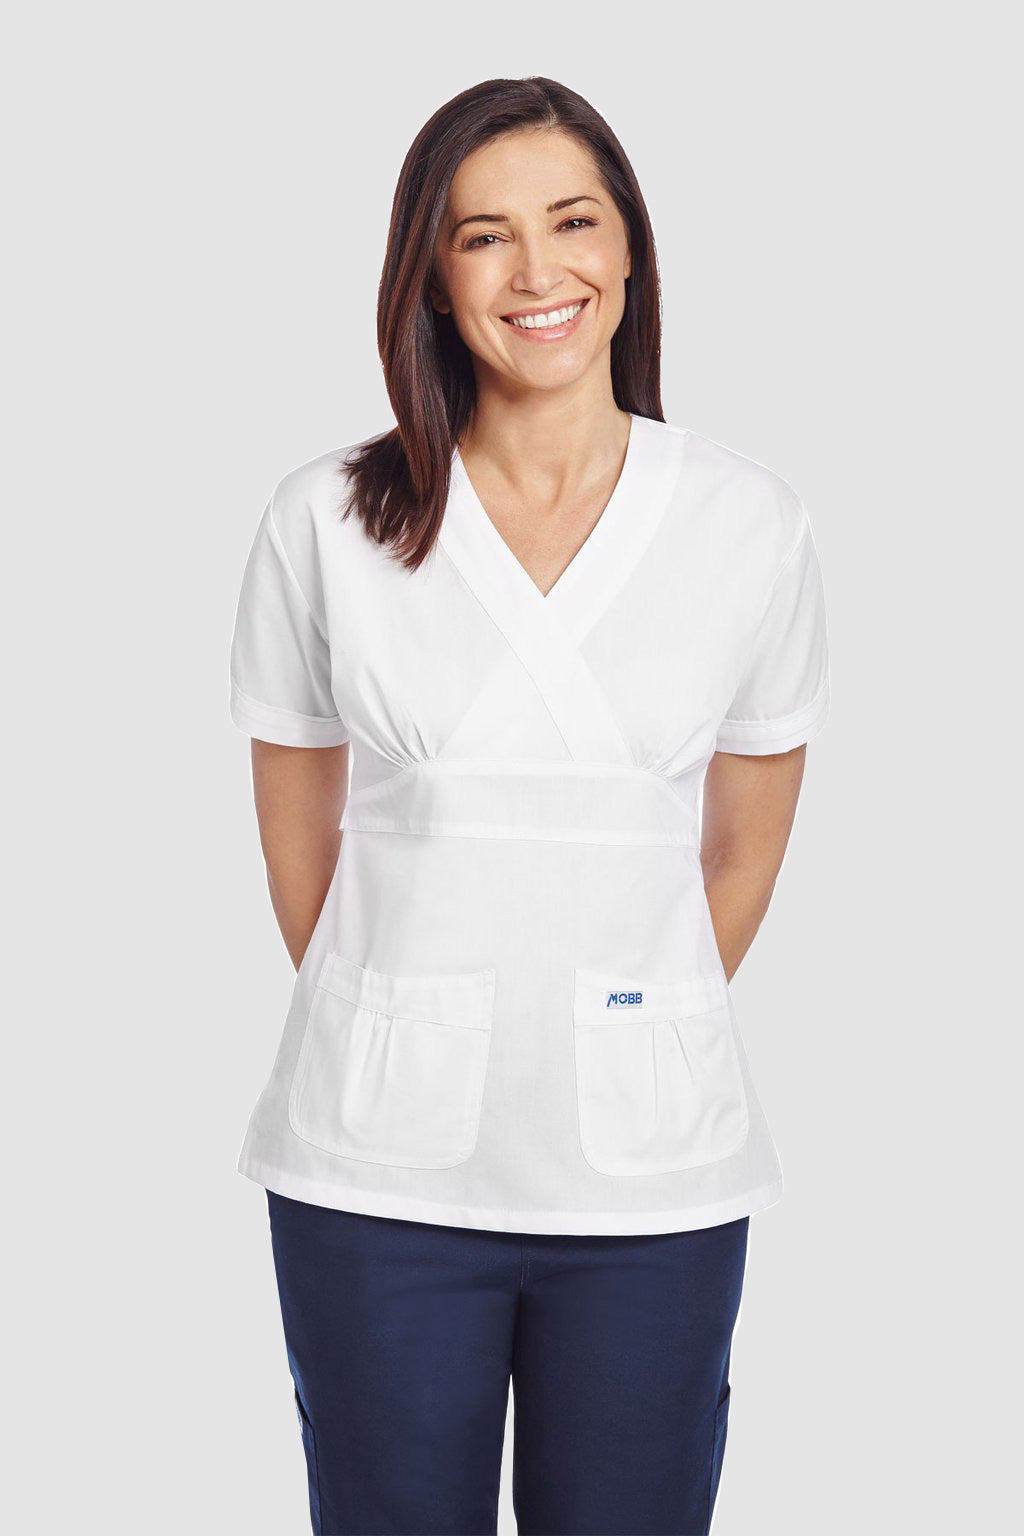 Product - Clearance Empire Tie Back Scrub Top by MOBB